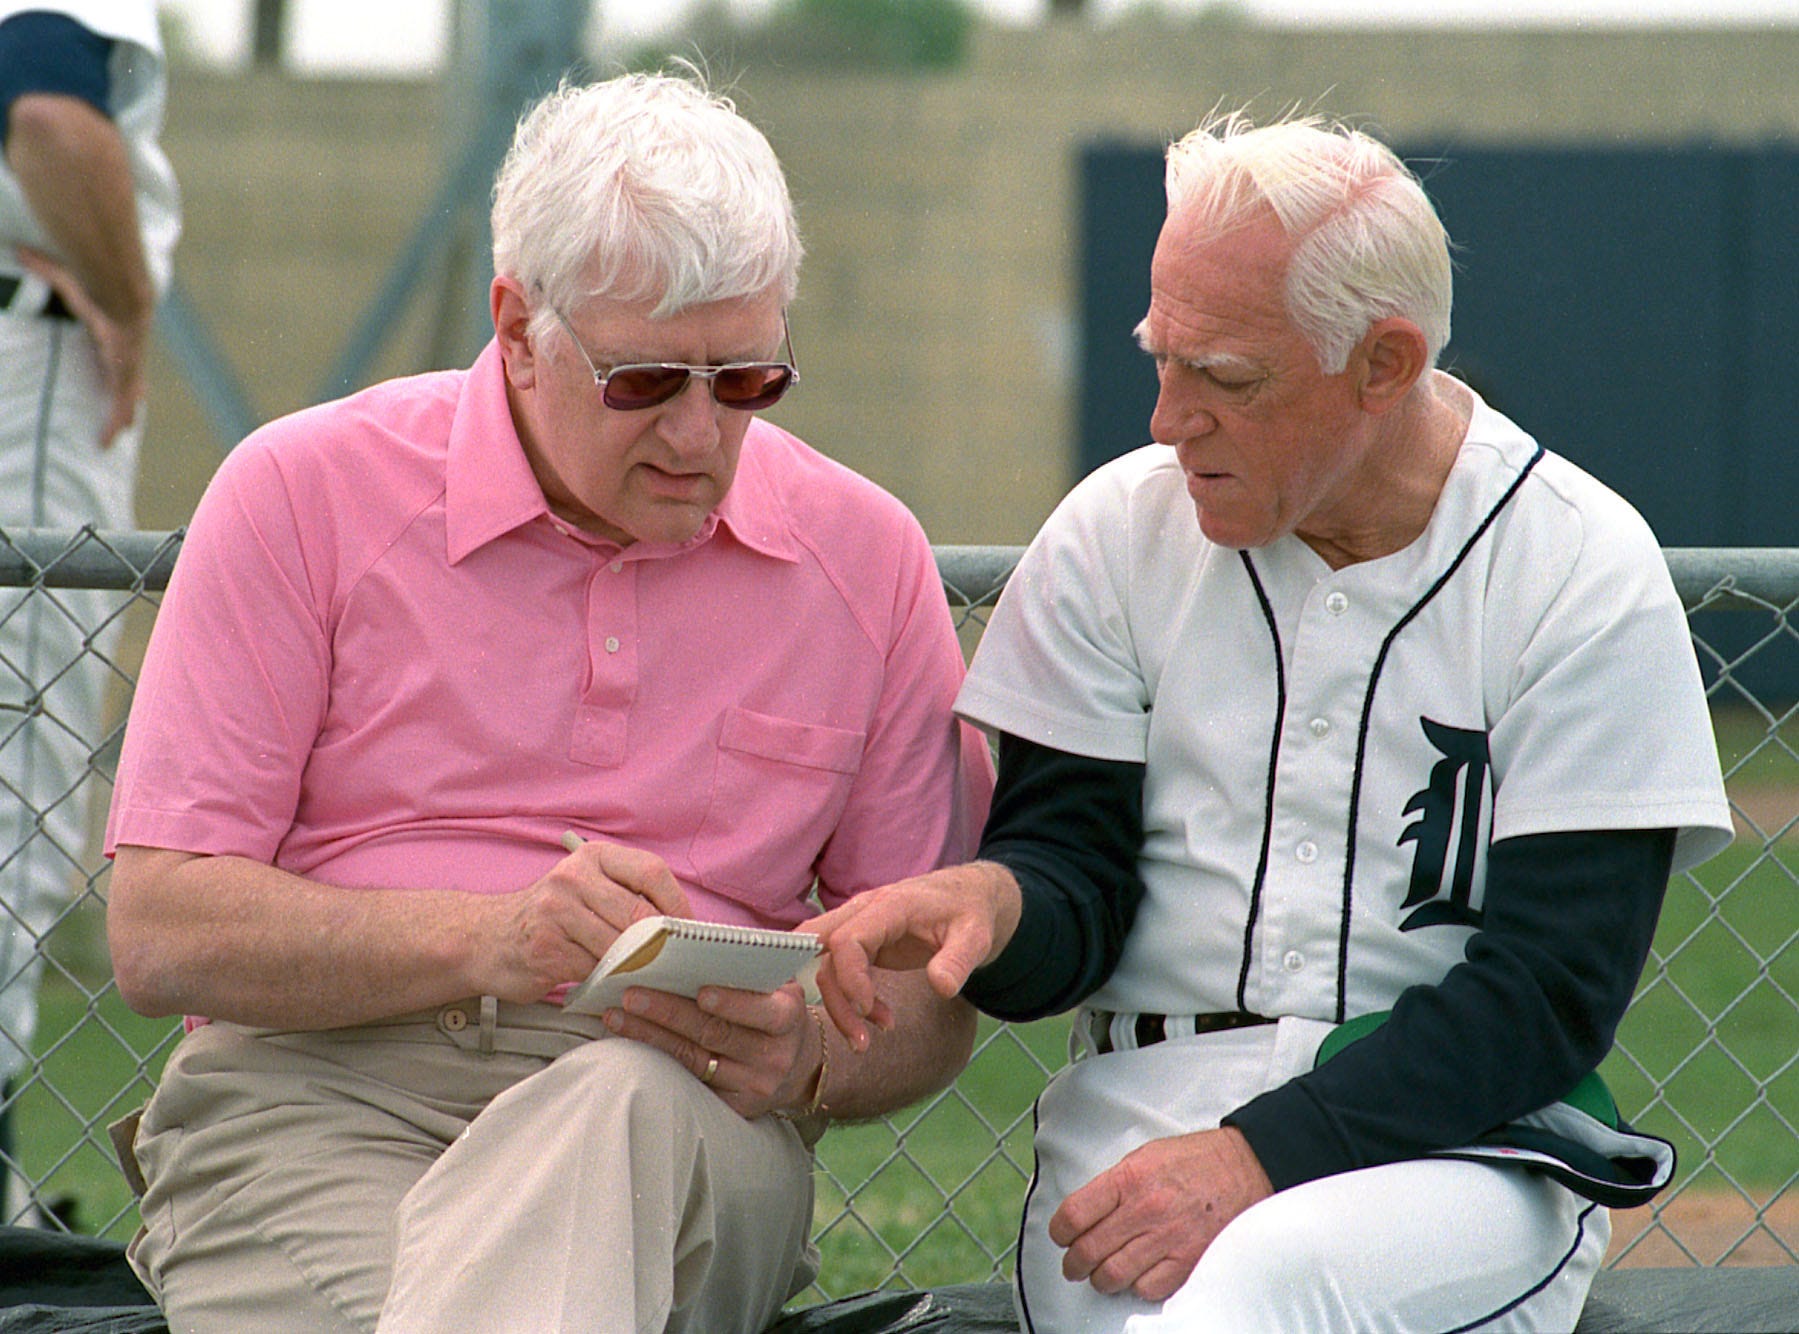 Joe Falls (left) interviews Detroit Tigers manager Sparky Anderson at spring training camp in Lakeland, Florida. 2/18/89.